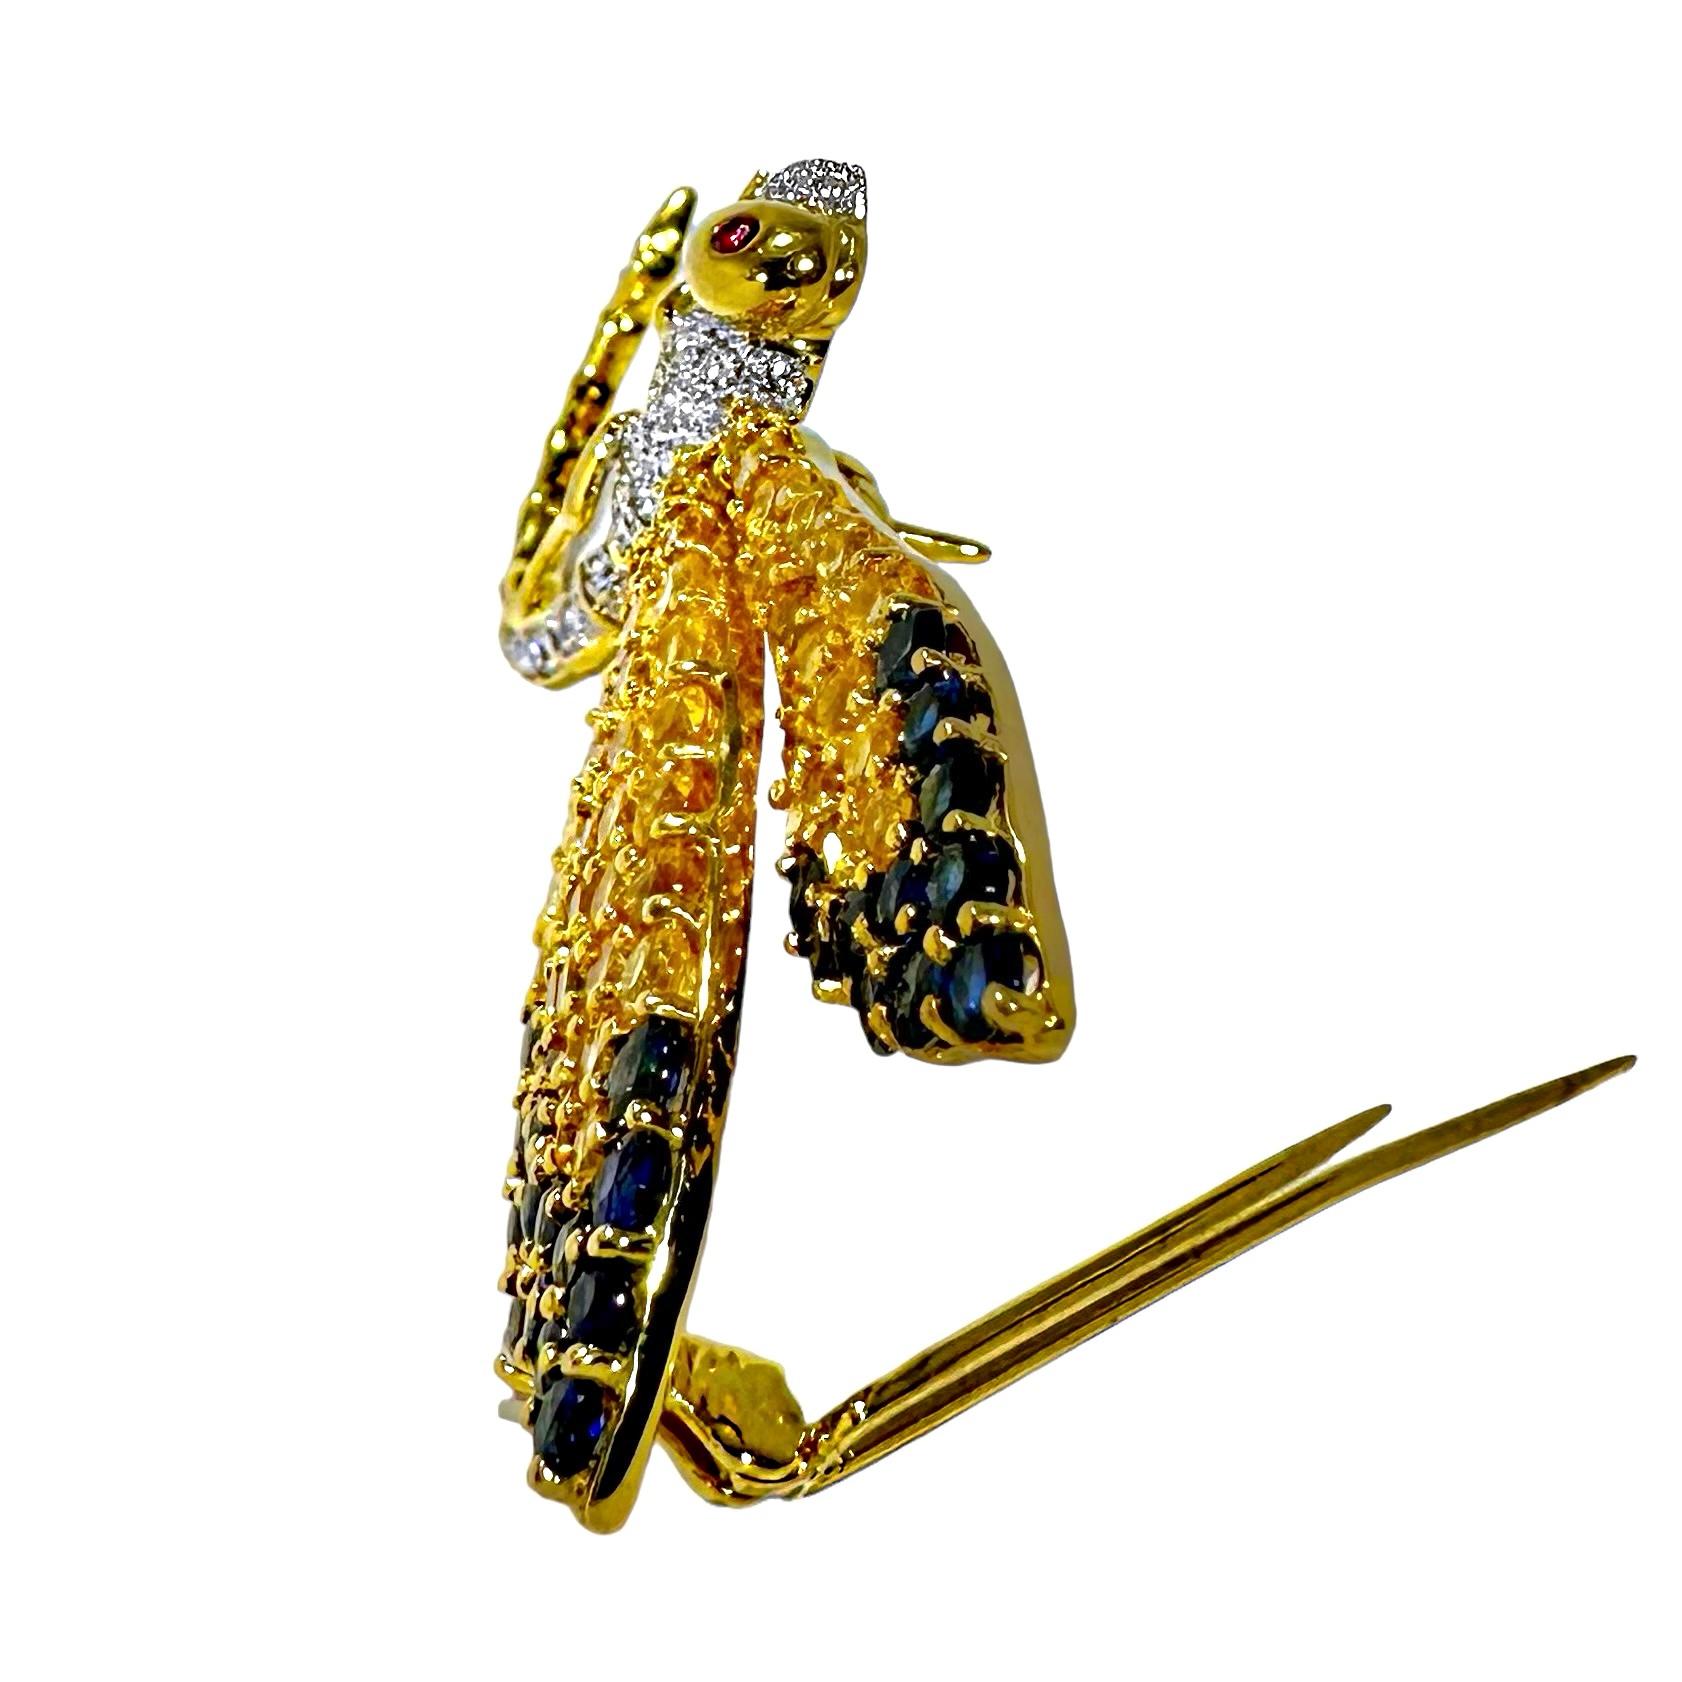 Brilliant Cut Scintillating Vintage Gold, Diamond, Golden and Blue Sapphire Dragonfly Brooch For Sale